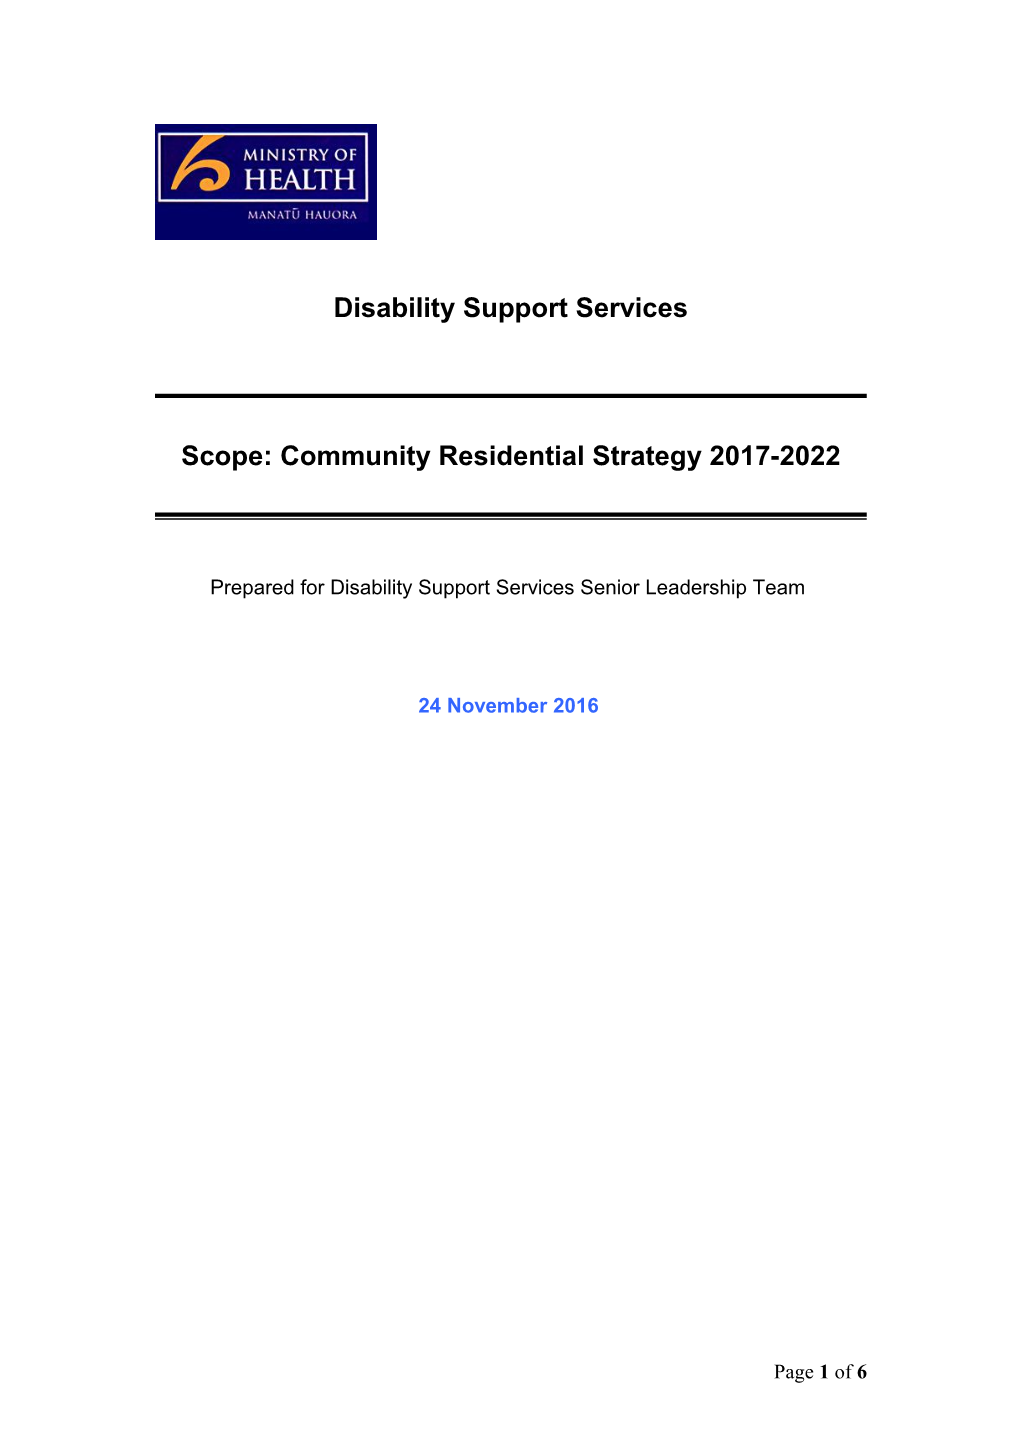 Community Residential Strategy 2017-2022